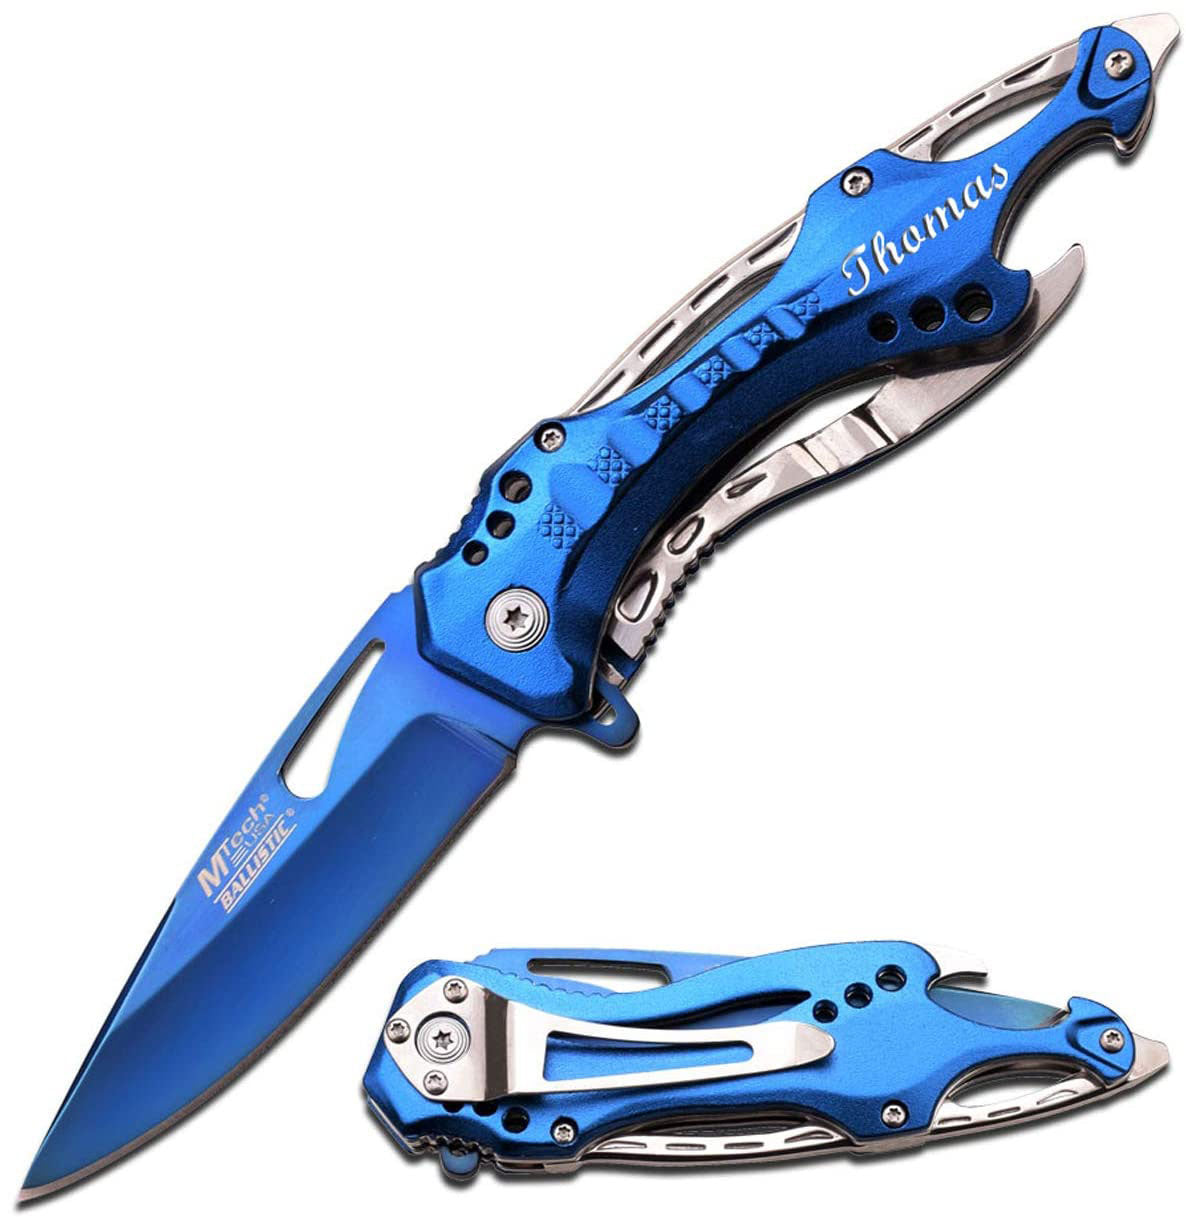 GIFTS INFINITY 4.5" Closed Personalized Engraved Folding Pocket Knife, Stainless Steel Tactical Blade Knife with Blue Silver Handle